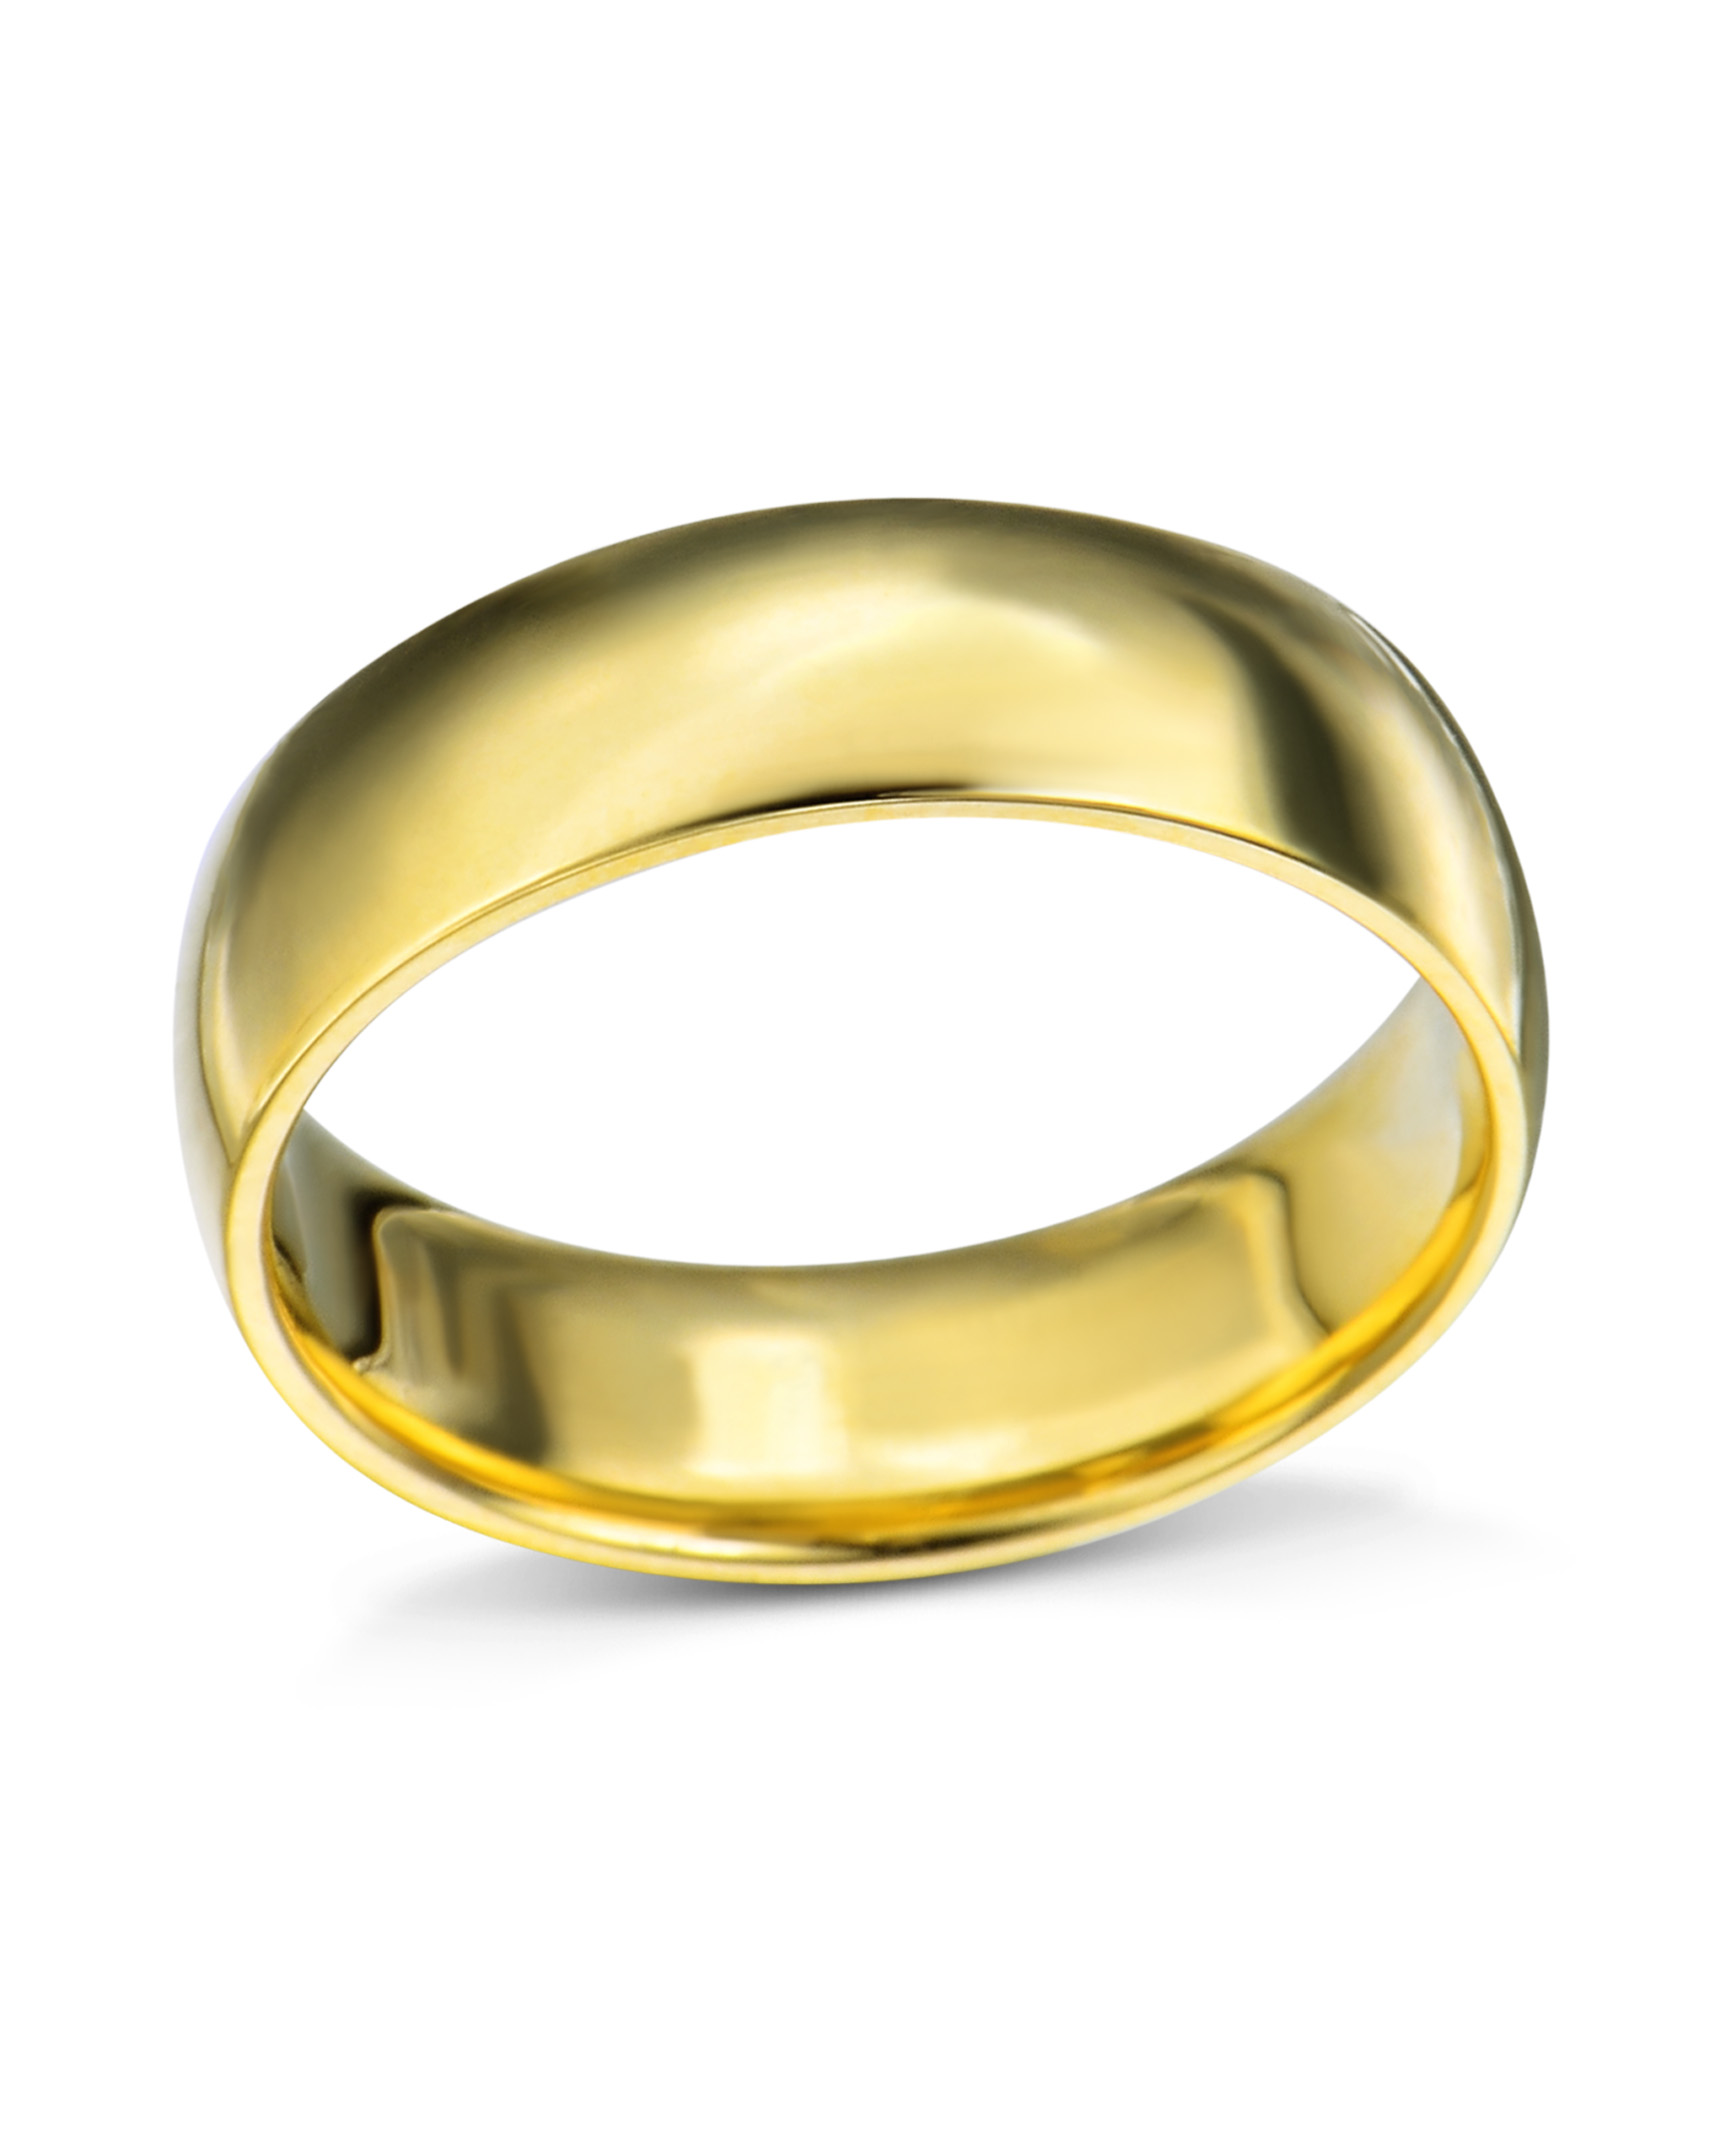 Dominus Band by George Rings - 18k yellow gold wedding band 4mm